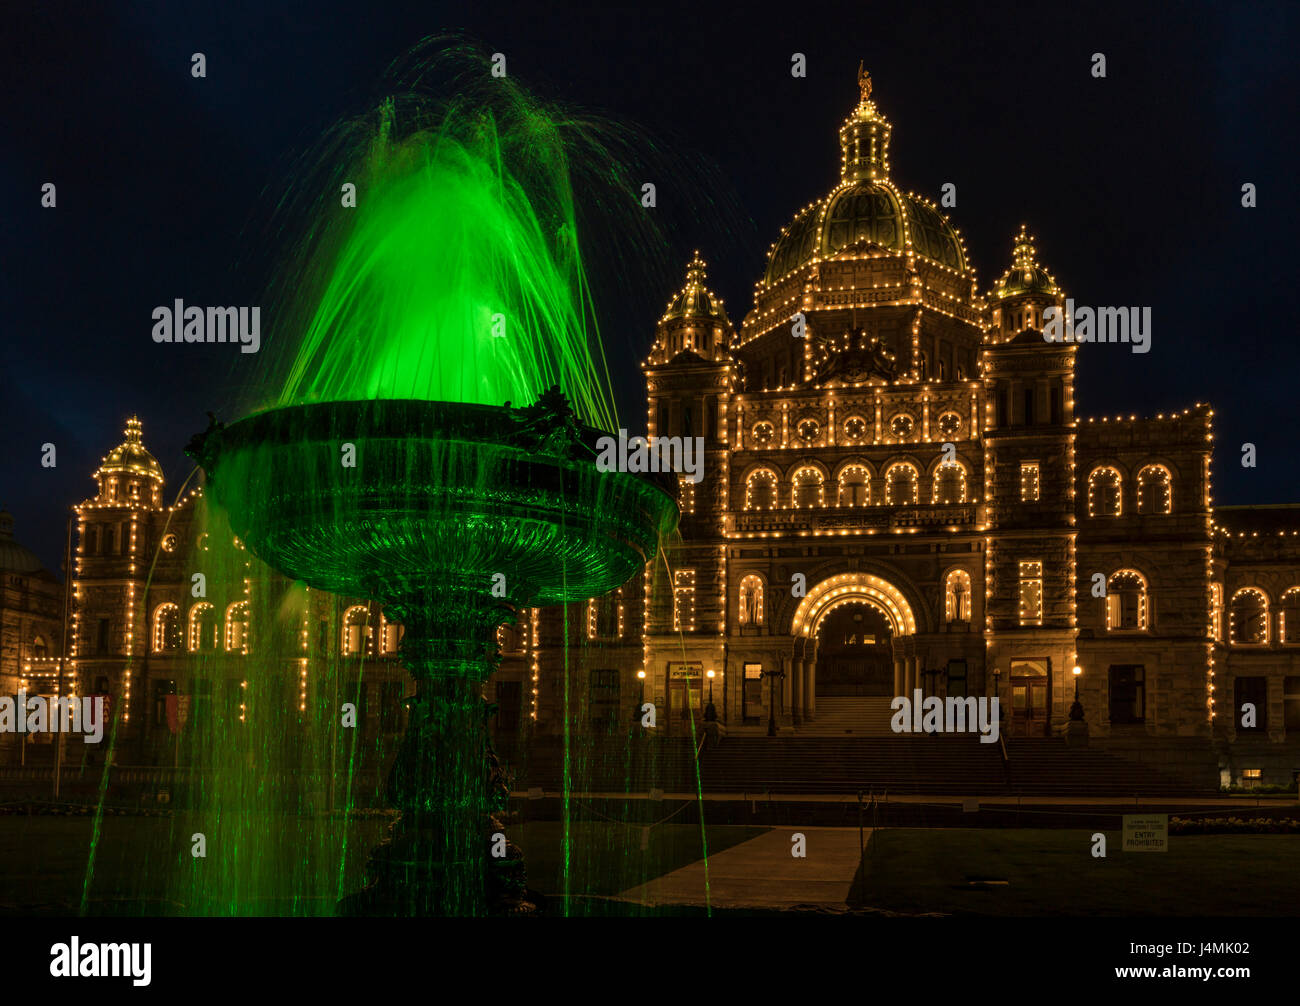 The fountain at the Parliament Buildings in Victoria, British Columbia, Canada, seen at night with illumination. Stock Photo